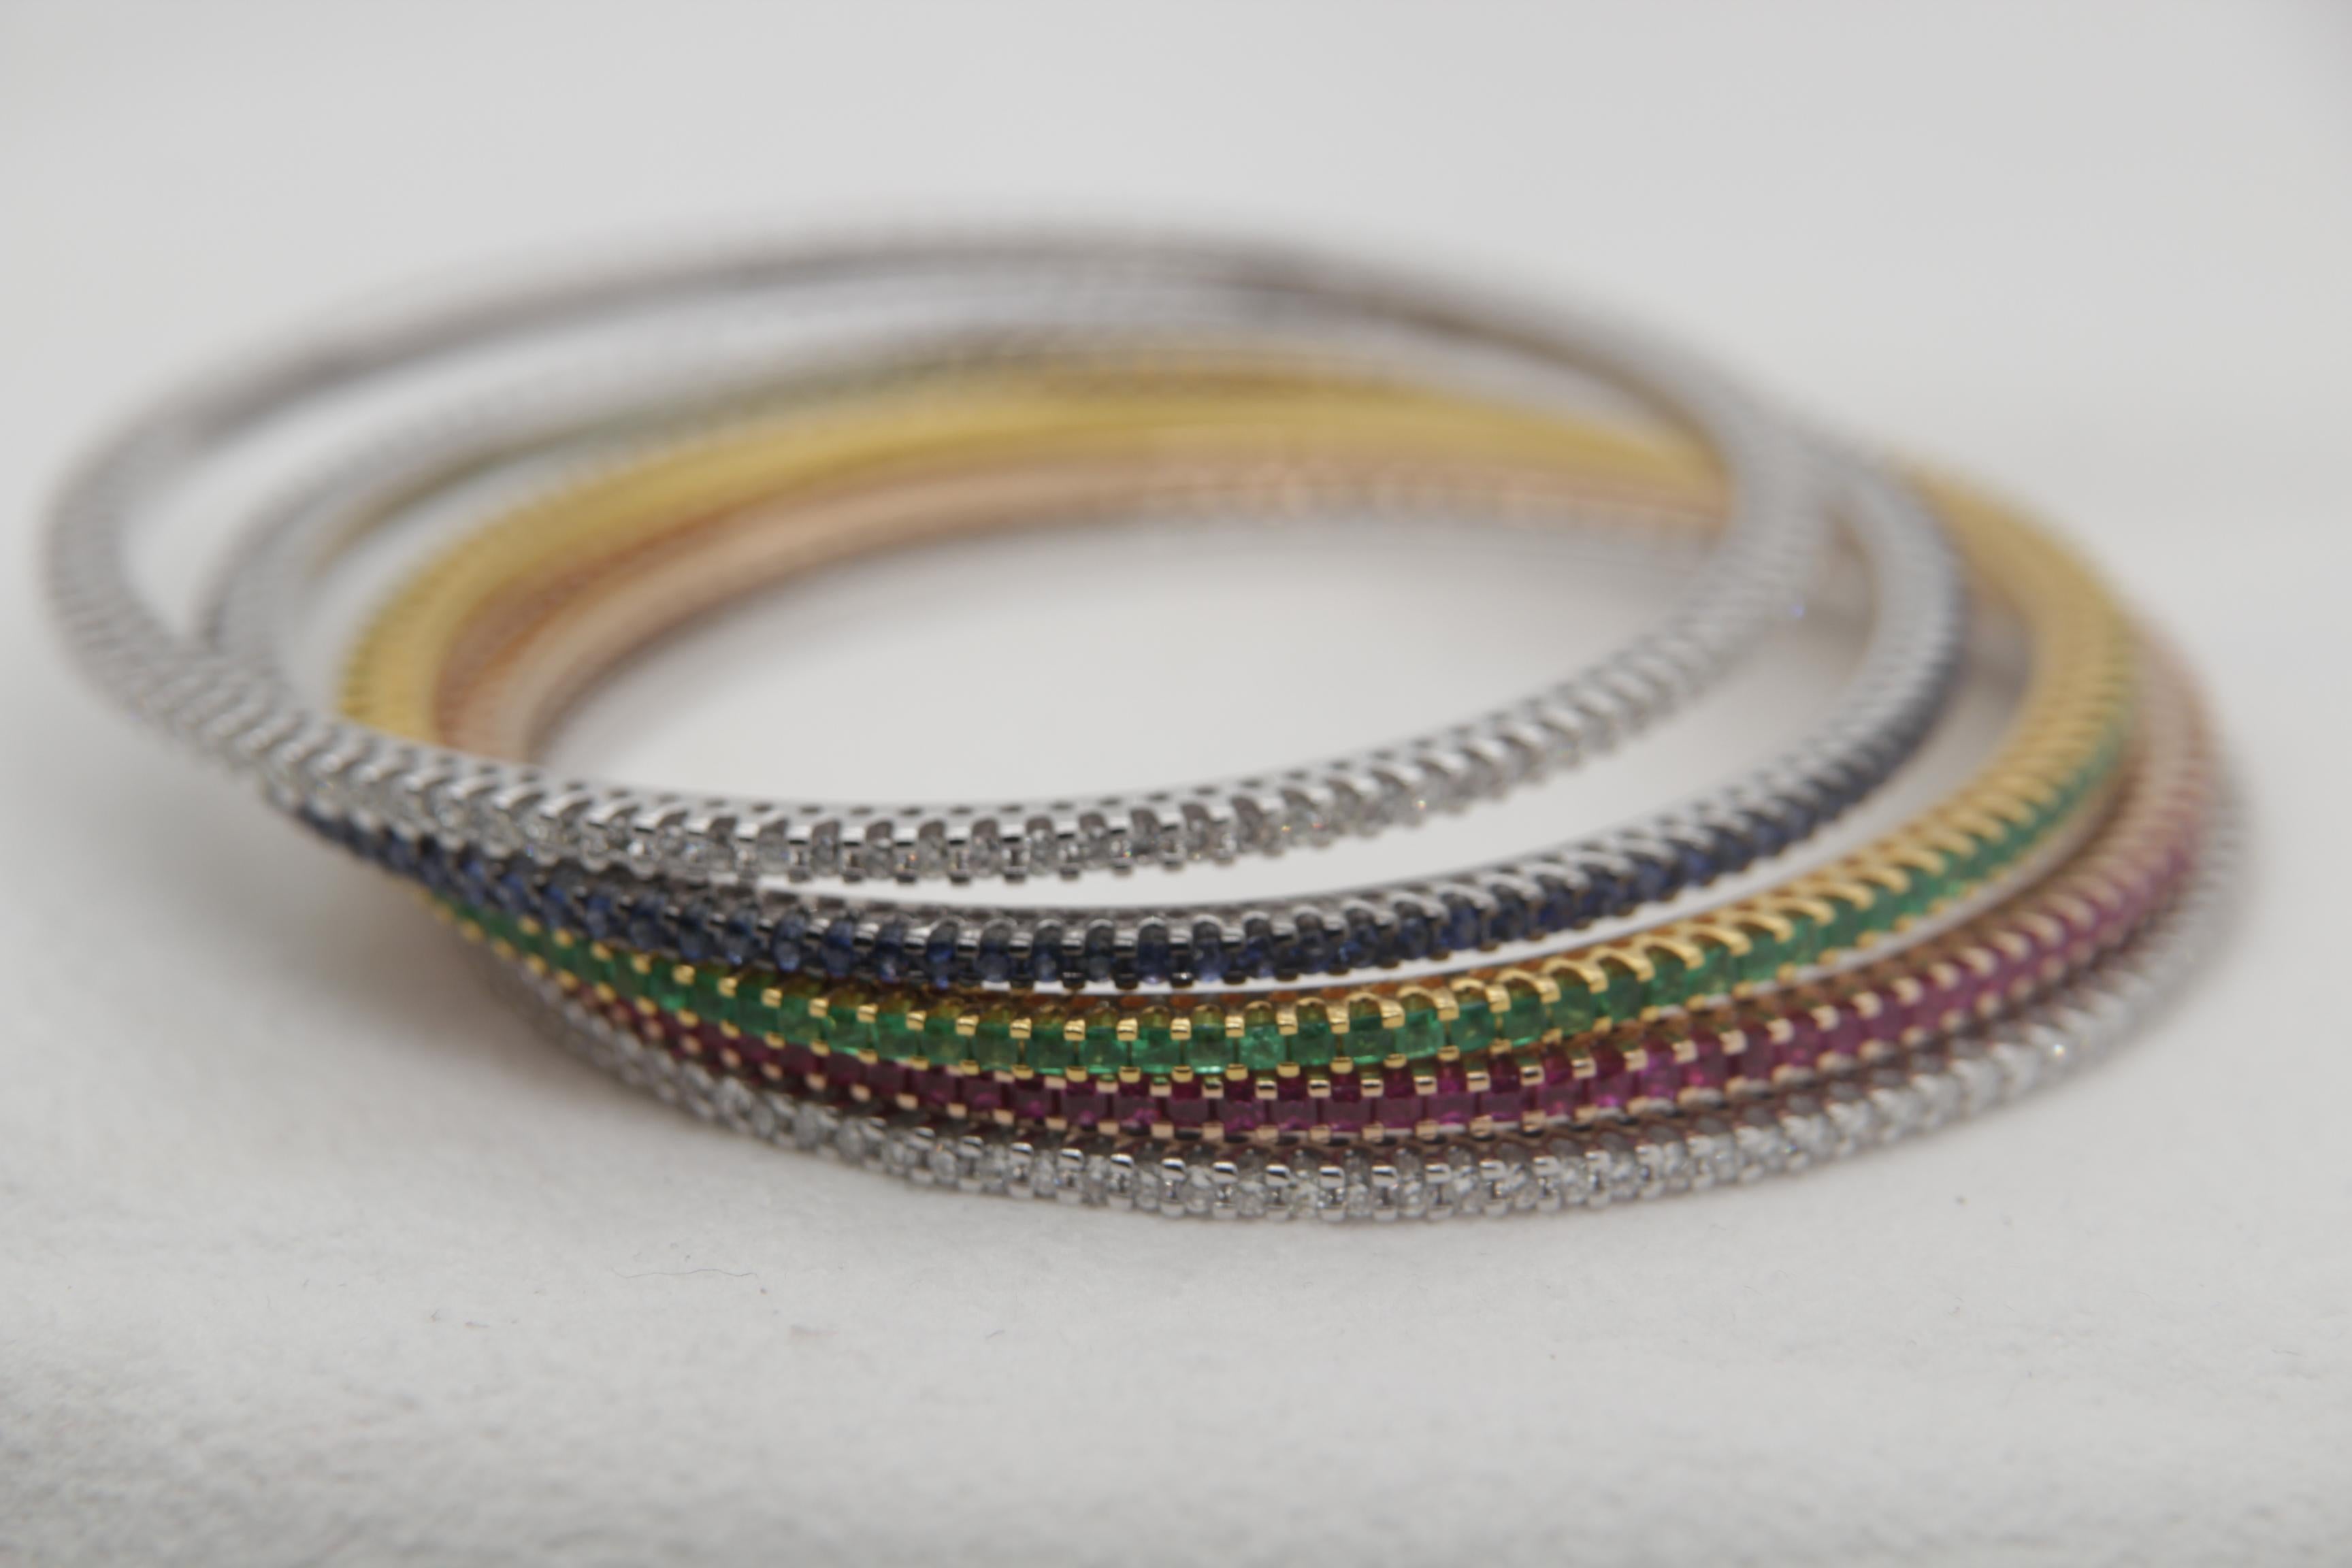 A brand new diamond, ruby, blue sapphire and emerald bangle in 18 karat gold. These are five bangles. The total diamond weight is 3.88 carat. The total ruby weight is 4.10 carat, blue sapphire weight is 2.52 carat and emerald weight is 3.02 carat.